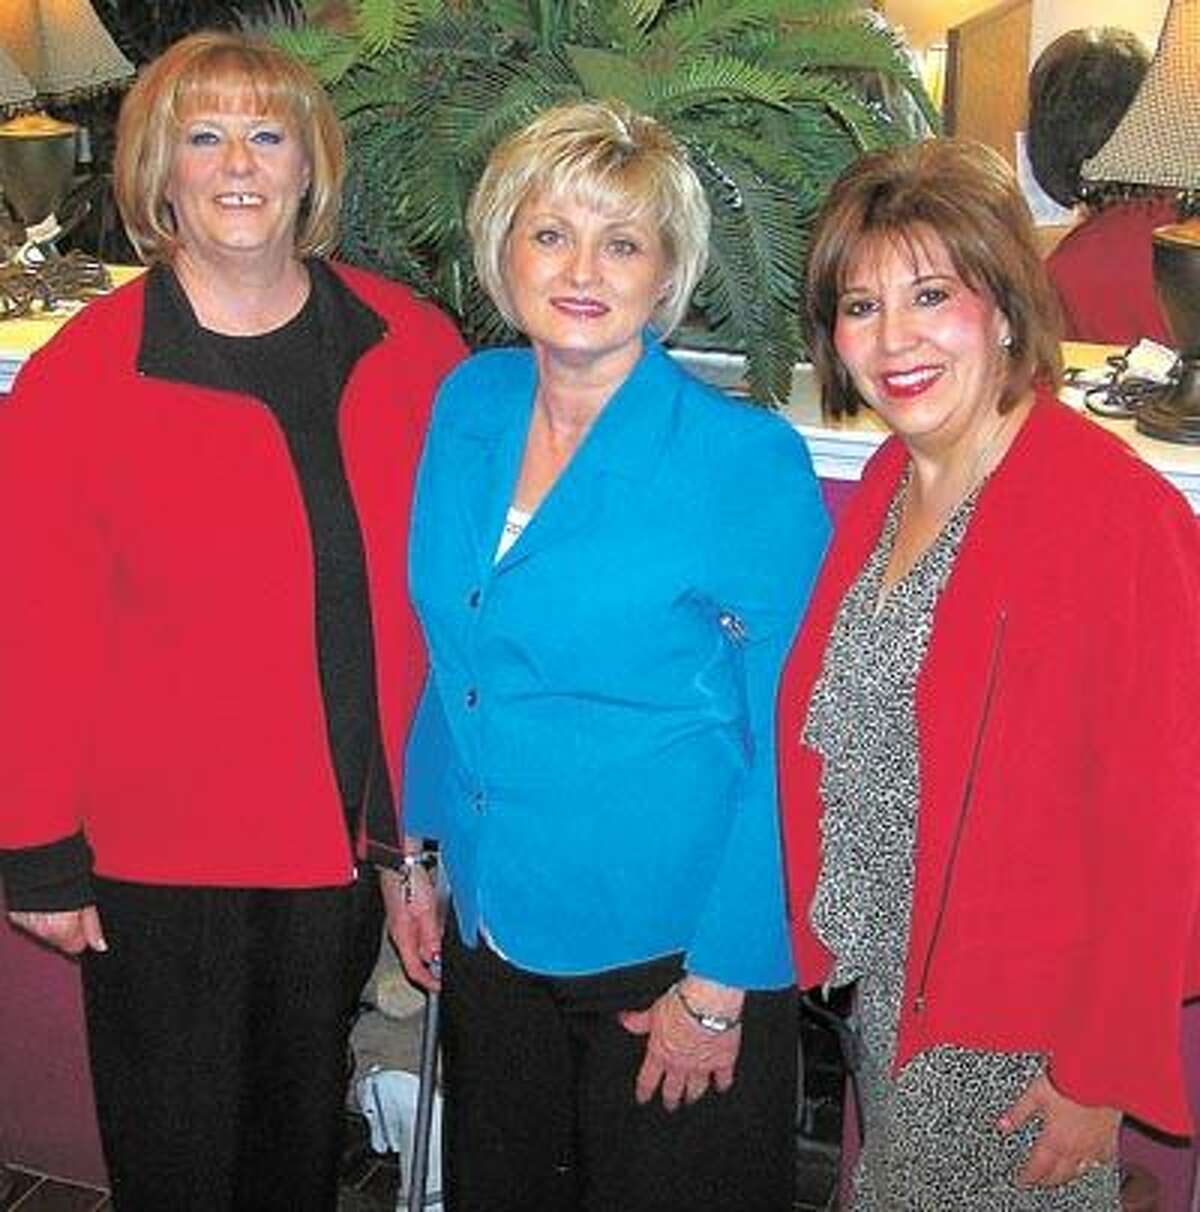 Debbie, Fran and Patricia invite you to call and see how Staffing Resources can help you meet the challenges of cutting staffing costs while still getting the work done. Call 684-0527.